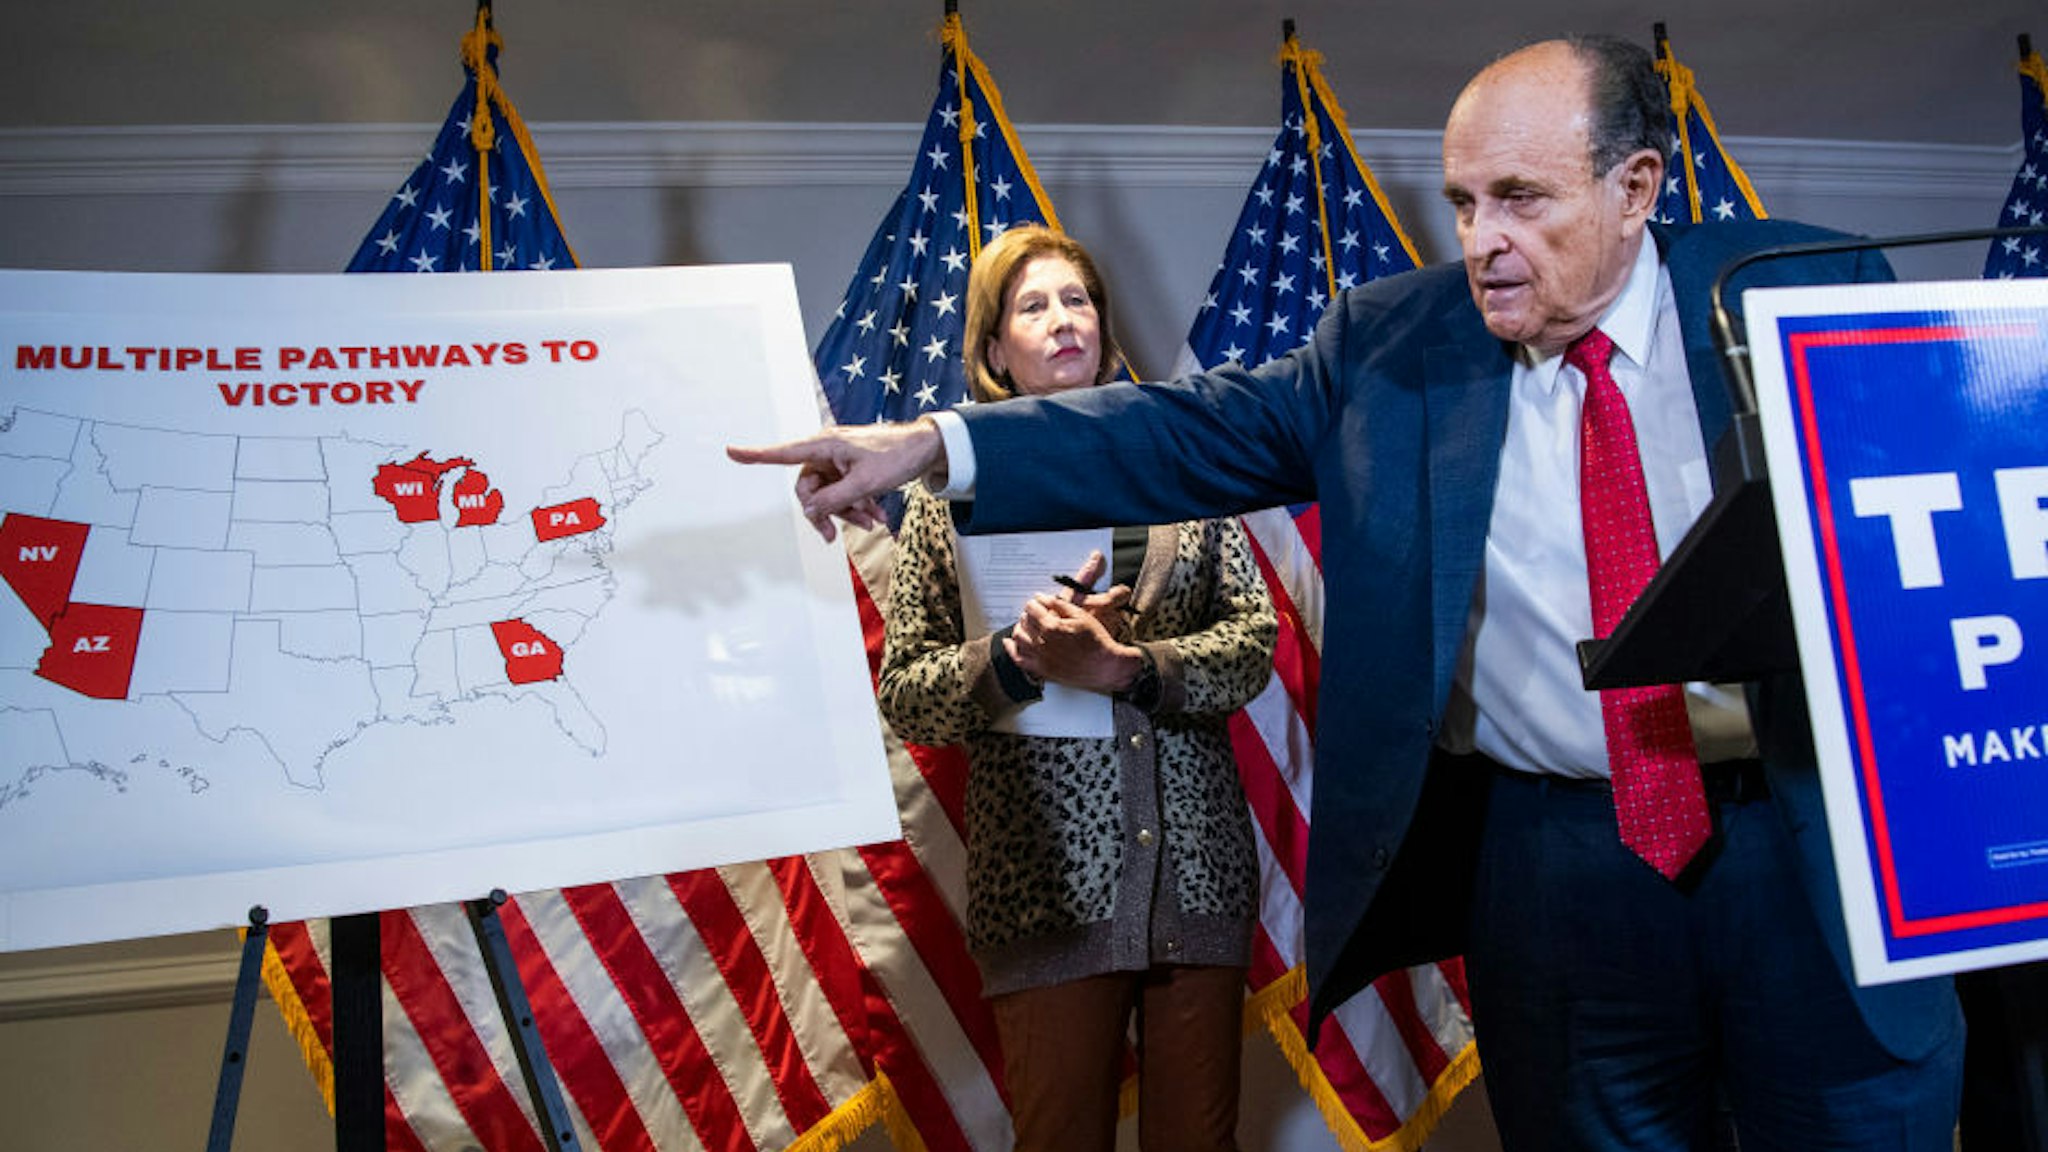 Rudolph Giuliani, attorney for President Donald Trump, conducts a news conference at the Republican National Committee on lawsuits regarding the outcome of the 2020 presidential election on Thursday, November 19, 2020.Trump attorney Sydney Powell, also appears. (Photo By Tom Williams/CQ Roll Call)